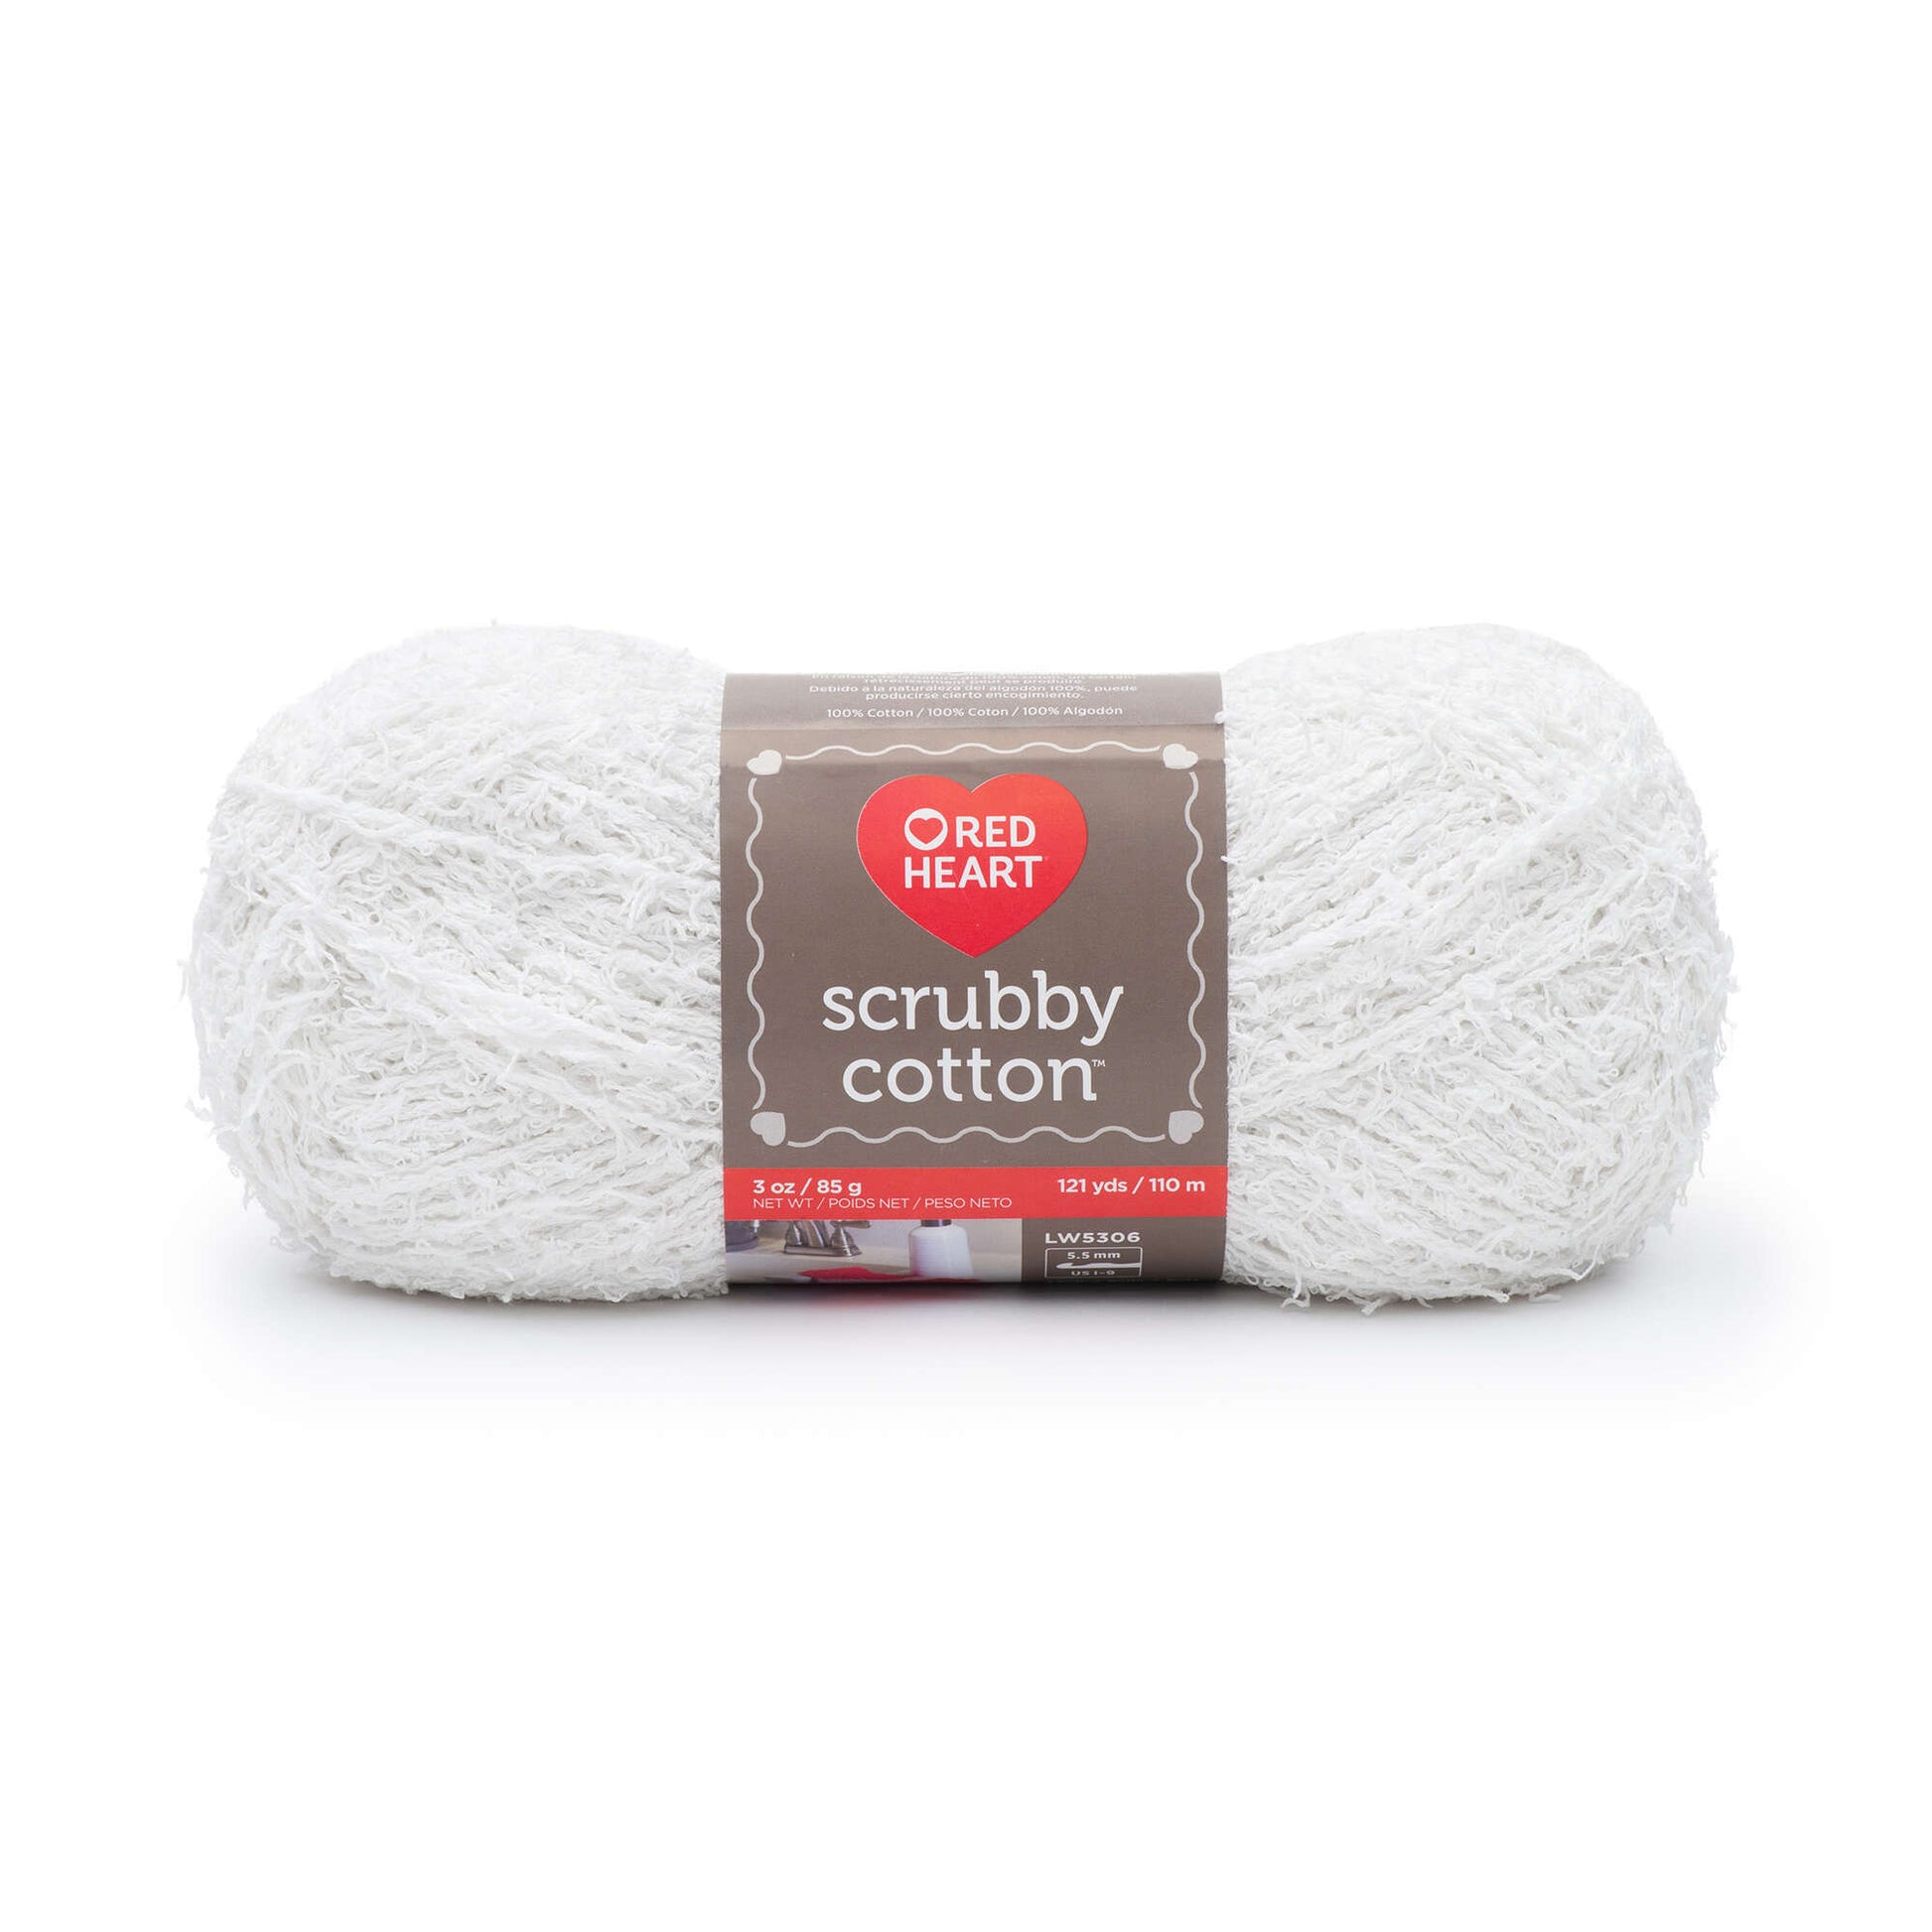 Red Heart Scrubby Cotton Yarn - Discontinued shades Cotton